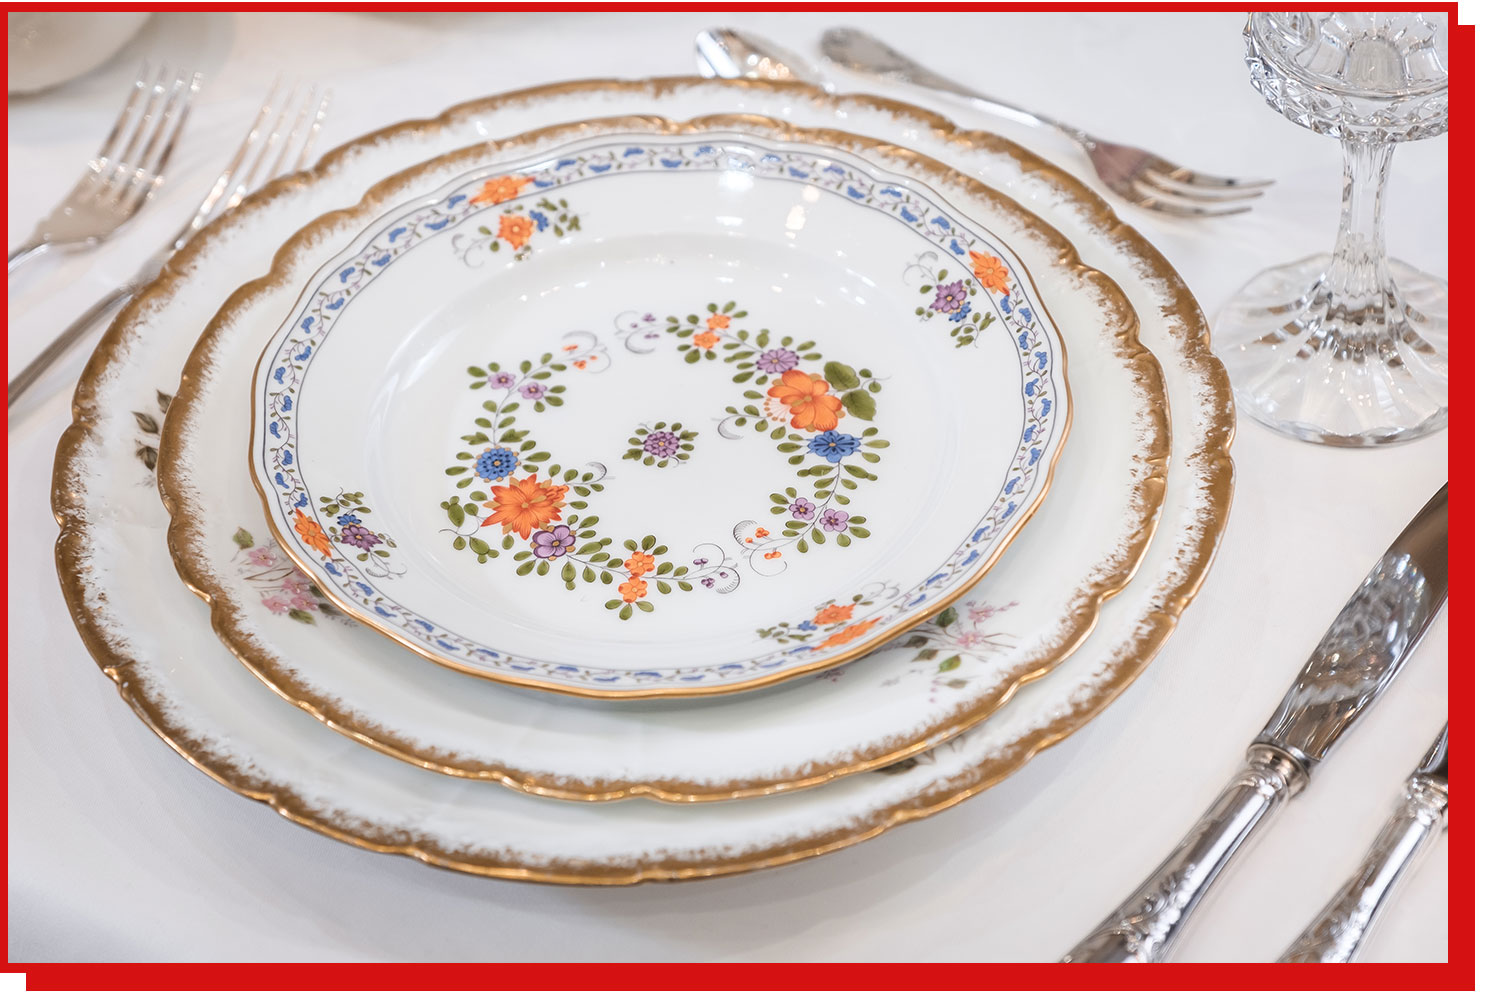 A tablesetting with vintage-style porcelain china and a crystal wine glass.